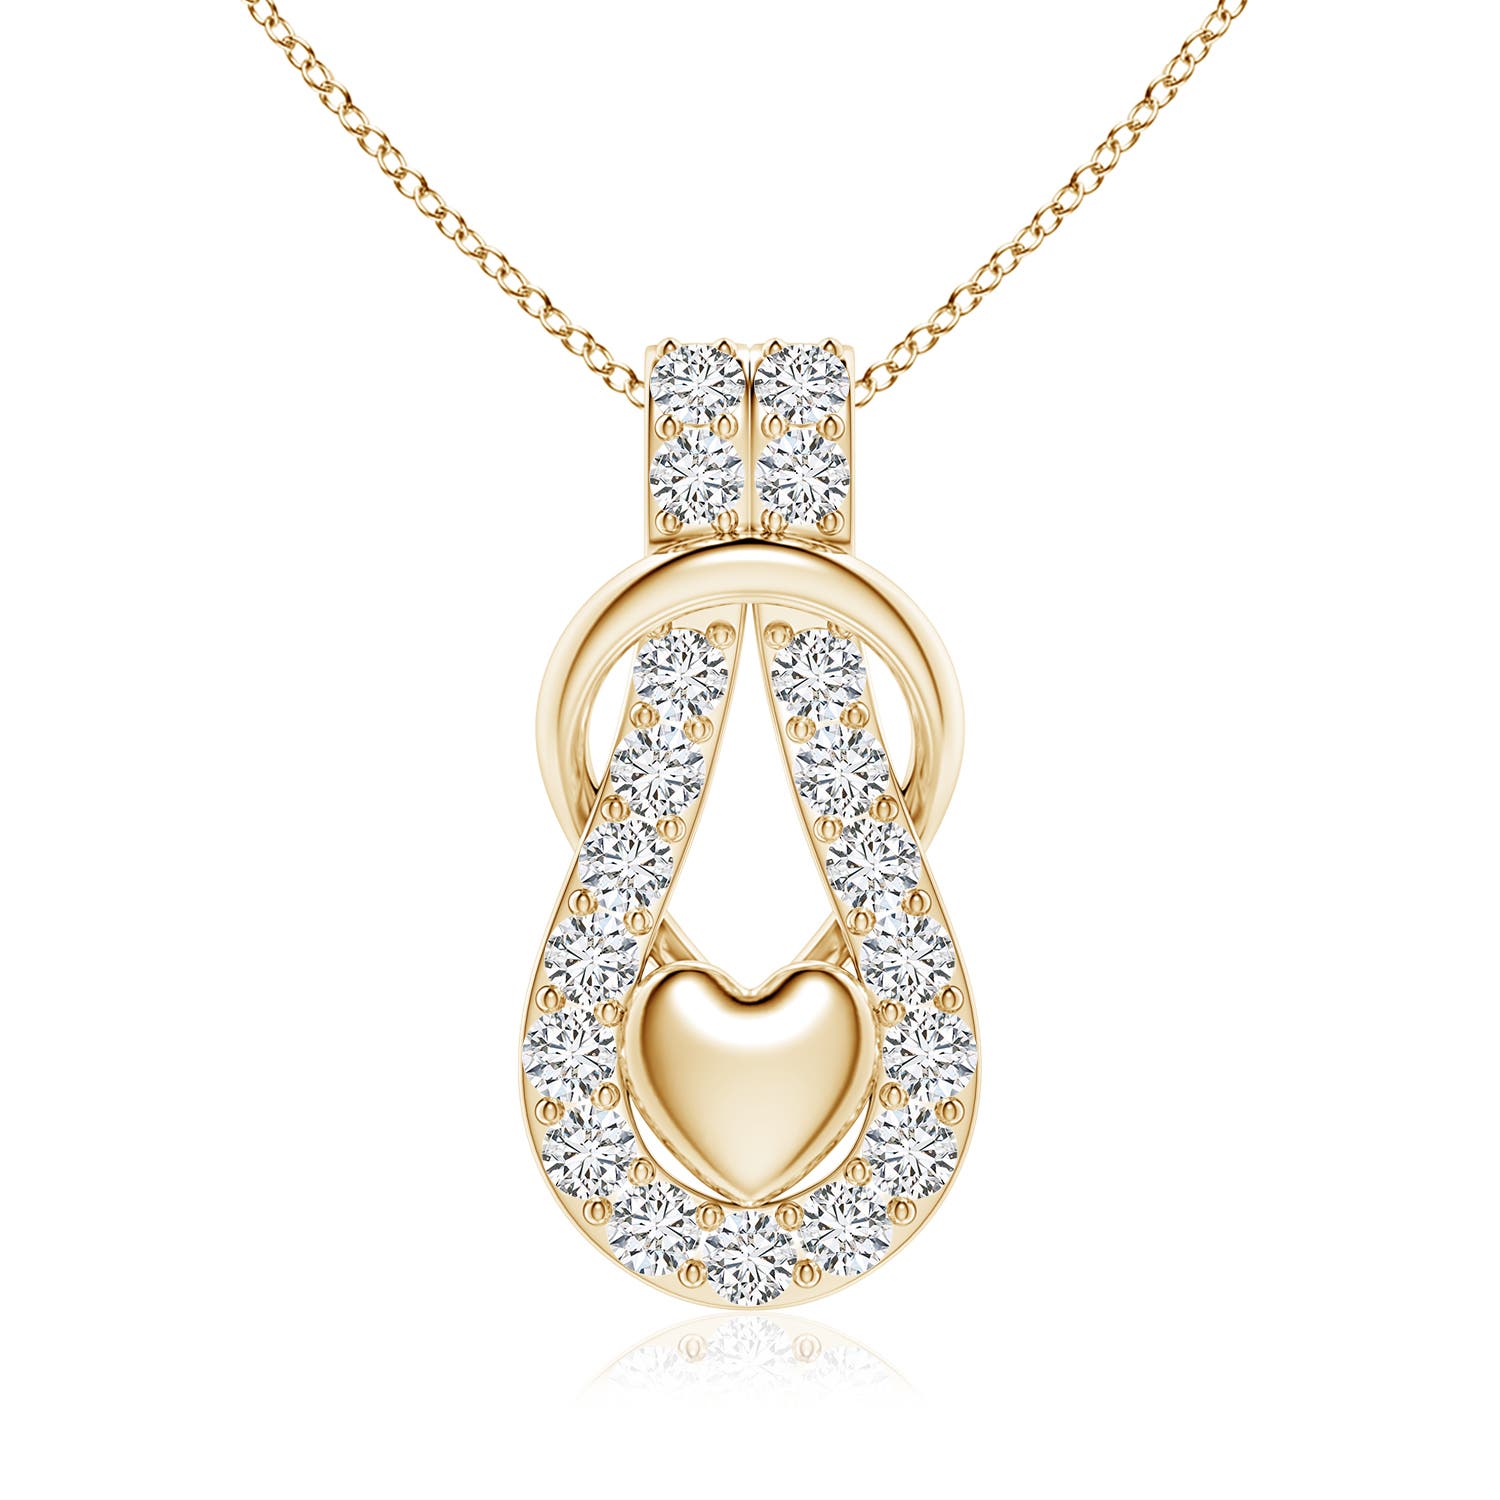 H, SI2 / 3.02 CT / 18 KT Yellow Gold